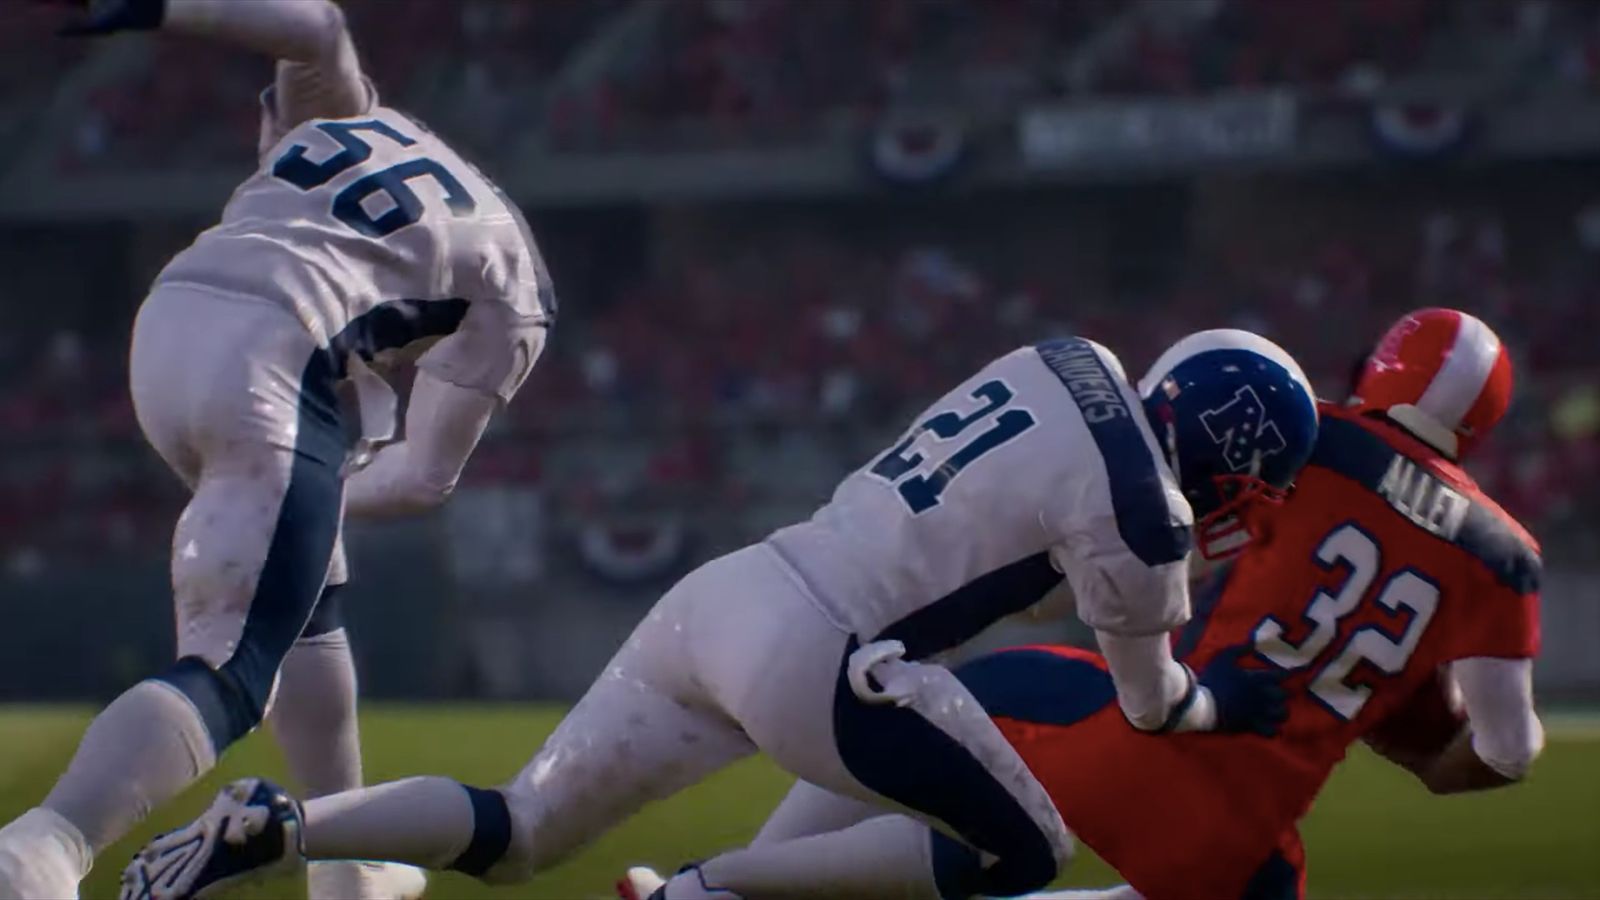 Image of a player being tackled in Madden 23.